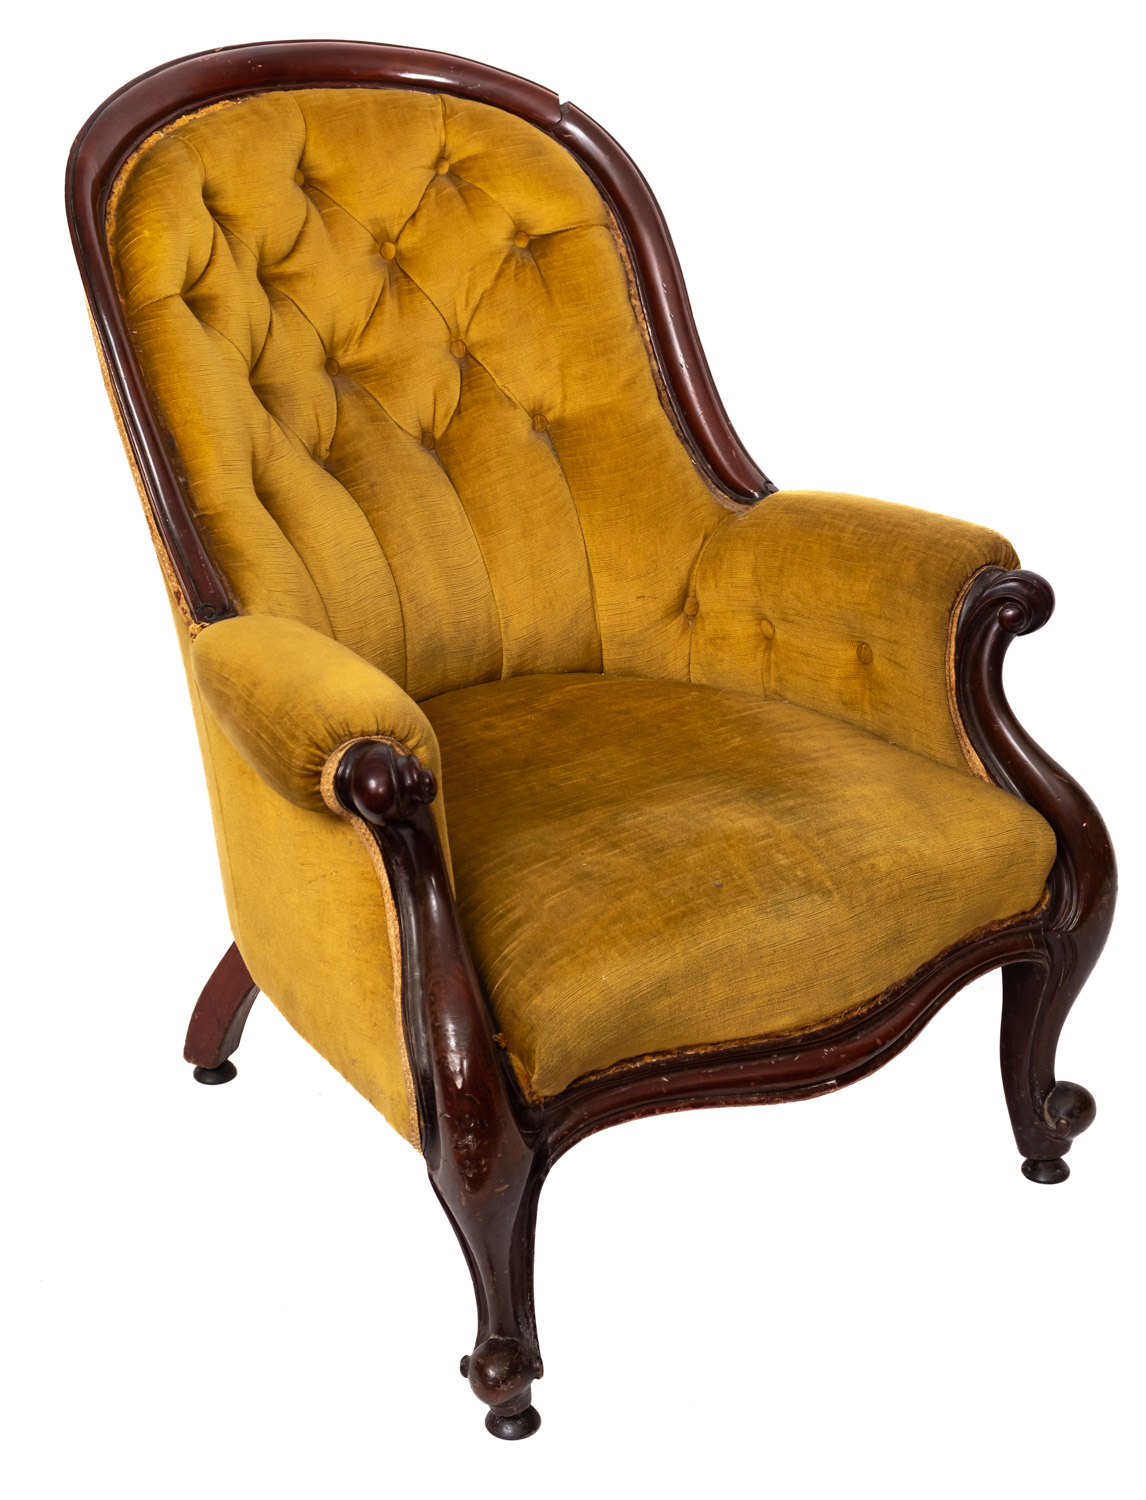 A Gentleman's Victorian mahogany armchair, circa 1860, with upholstered button down back,